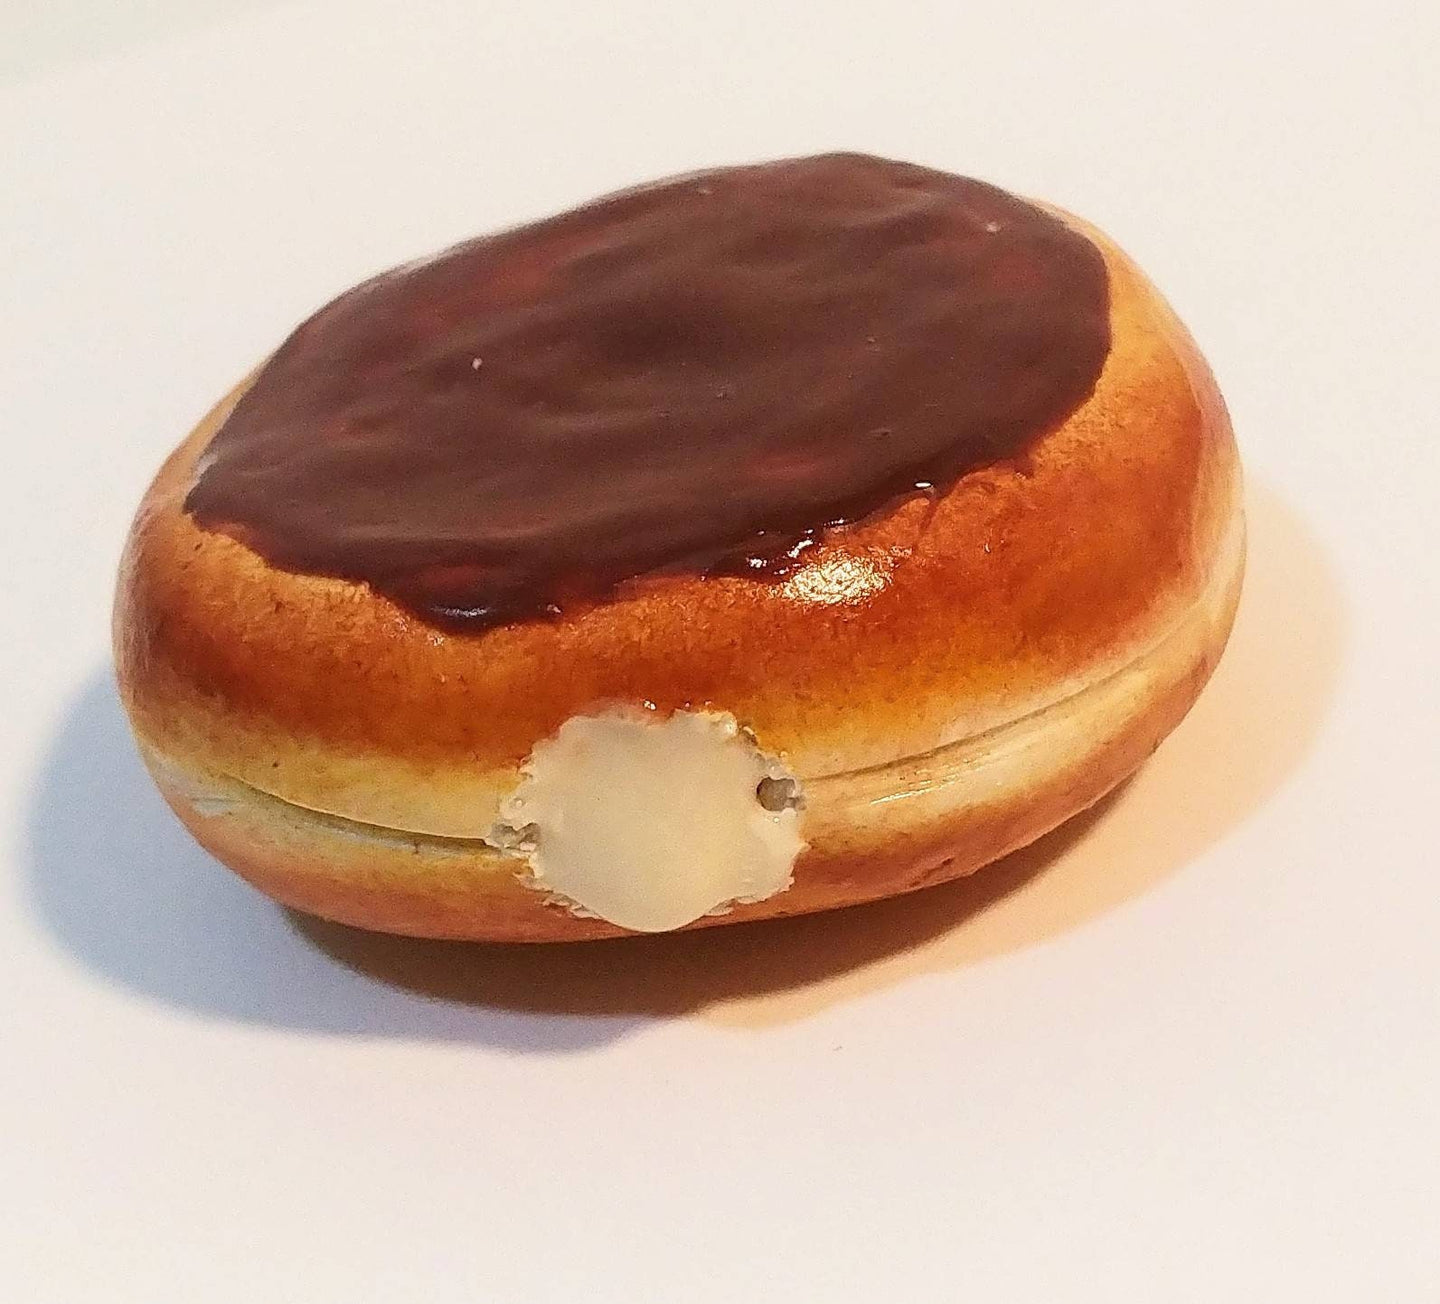 Boston Cream Donut Magnet // Fake food Magnets, Doughnut Magnet, Bakery Decor, Foodie Gifts, Christmas Gift